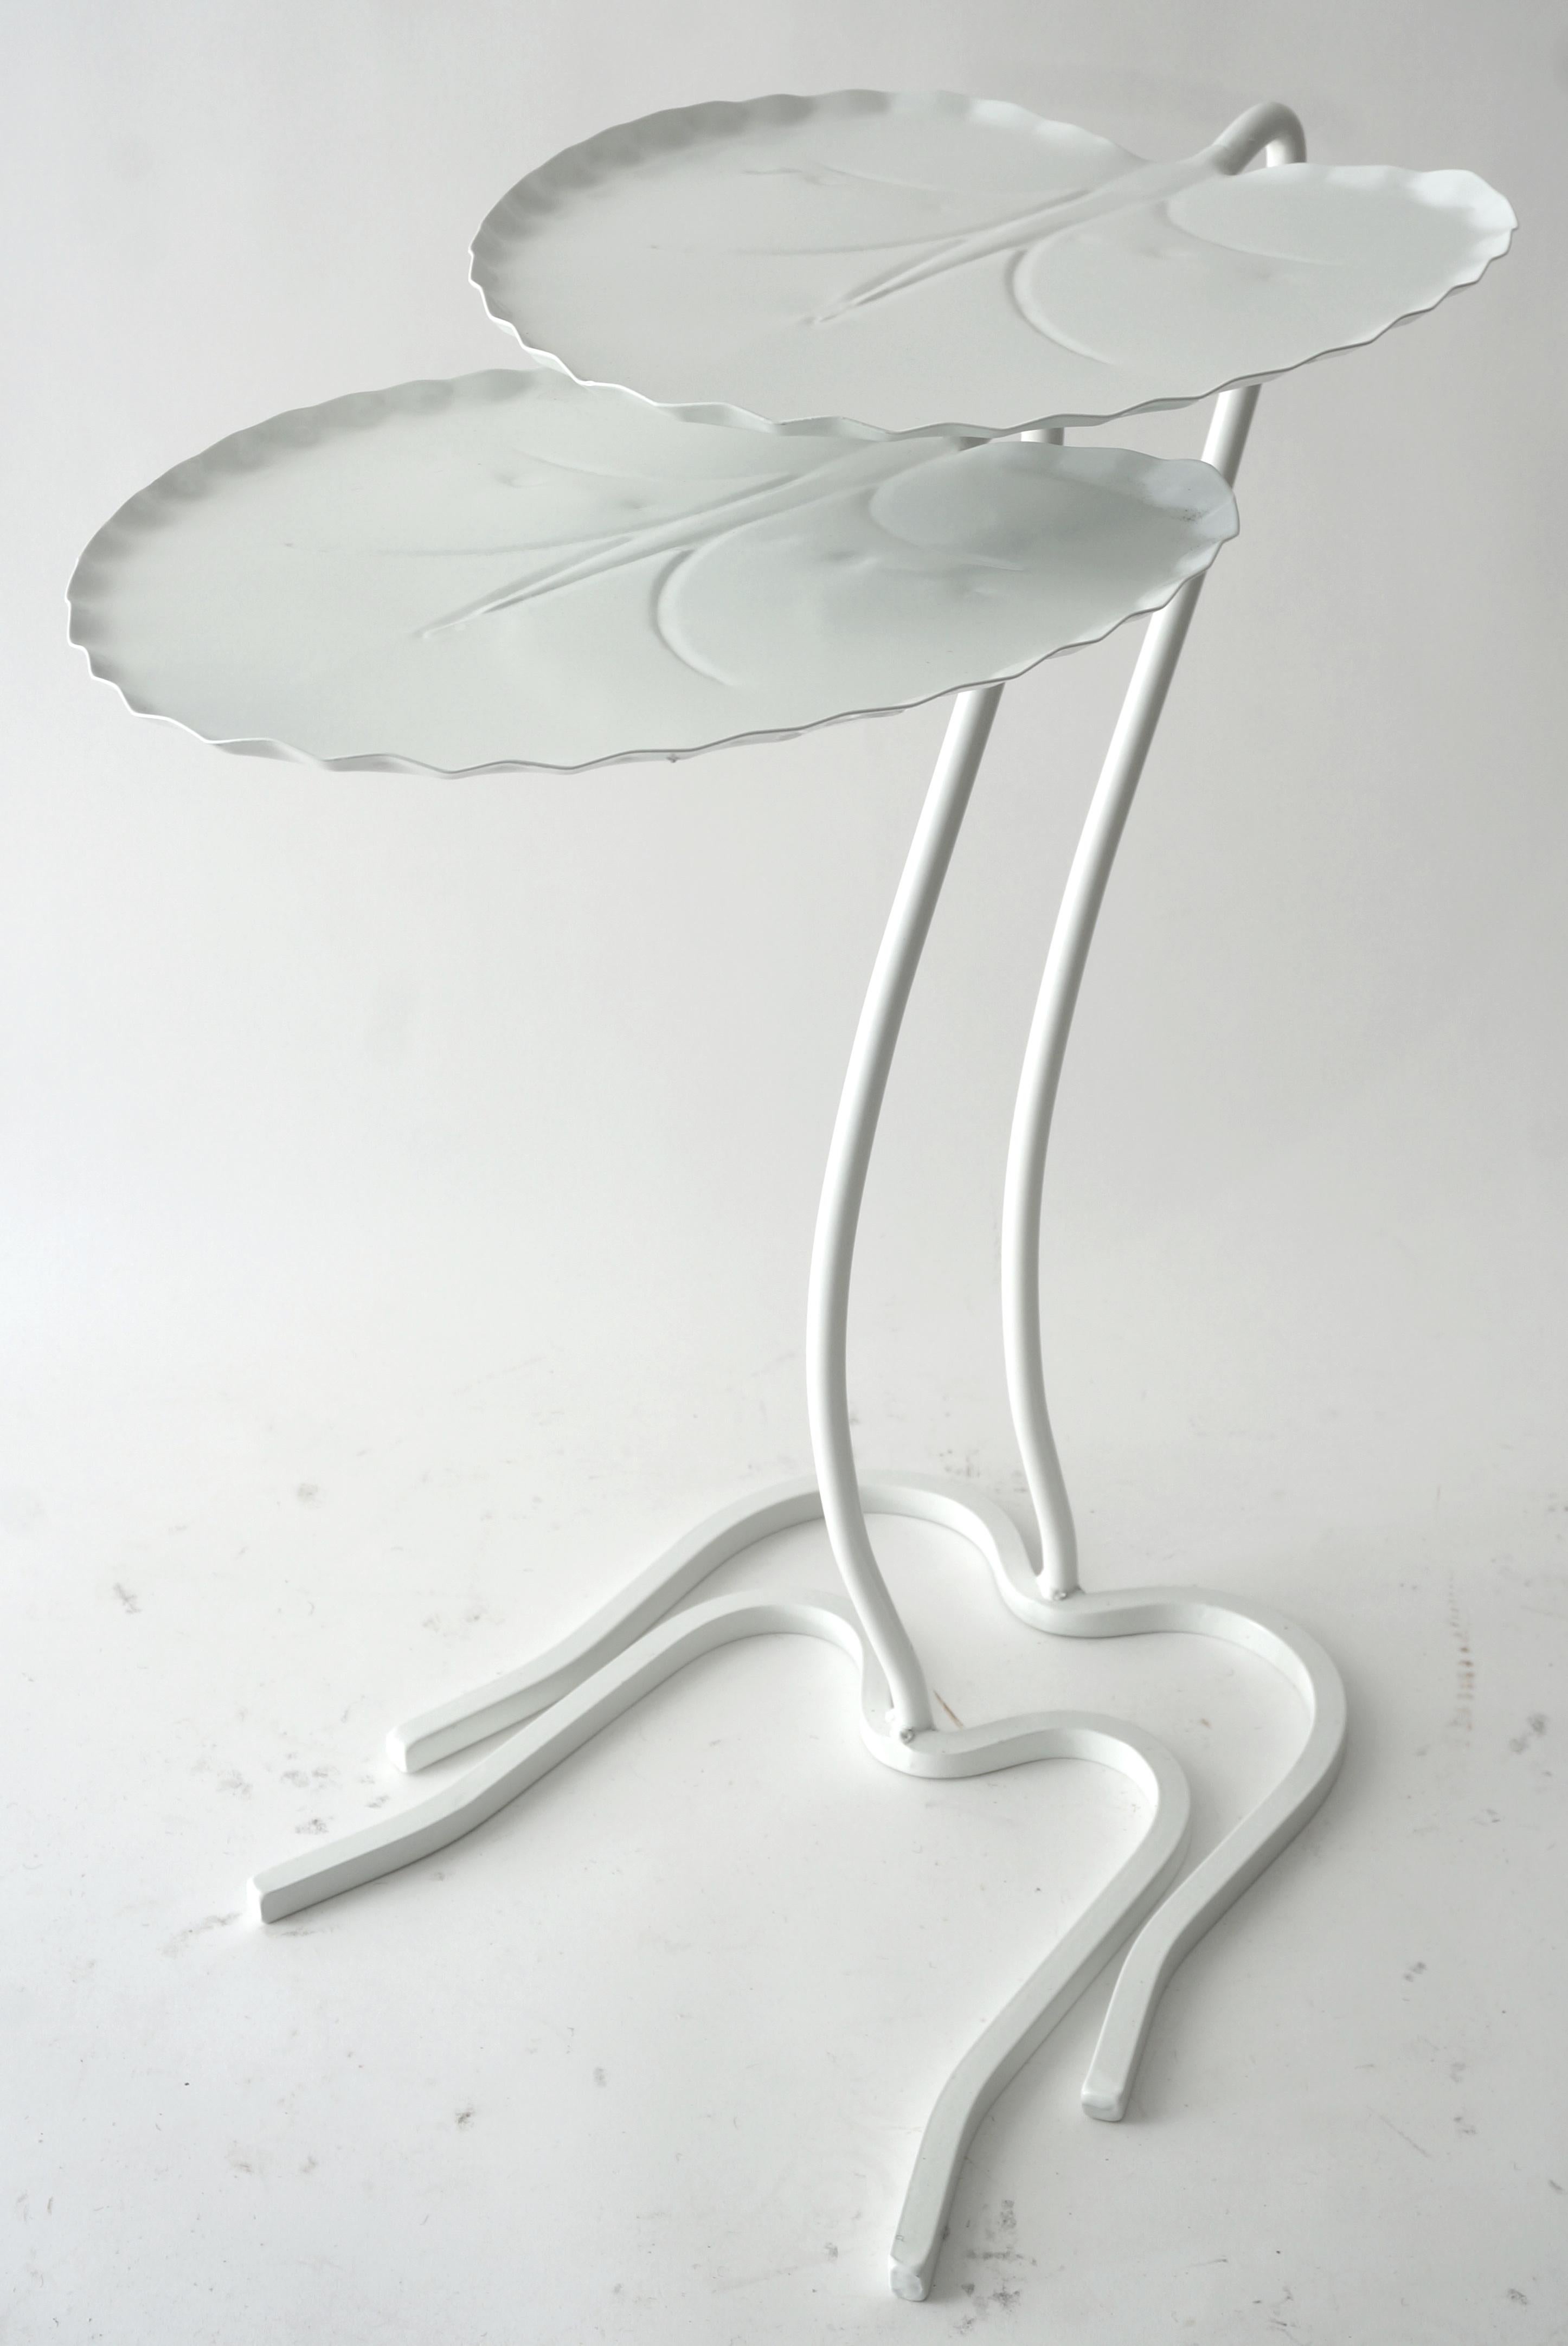 
This stylish, chic and iconic set of Salterini lily pad tables date to the 1960s-1970s and they will make a statement around the pool, or perhaps your garden room.

Note: These pieces have been professionally sandblasted and powdercoated in the